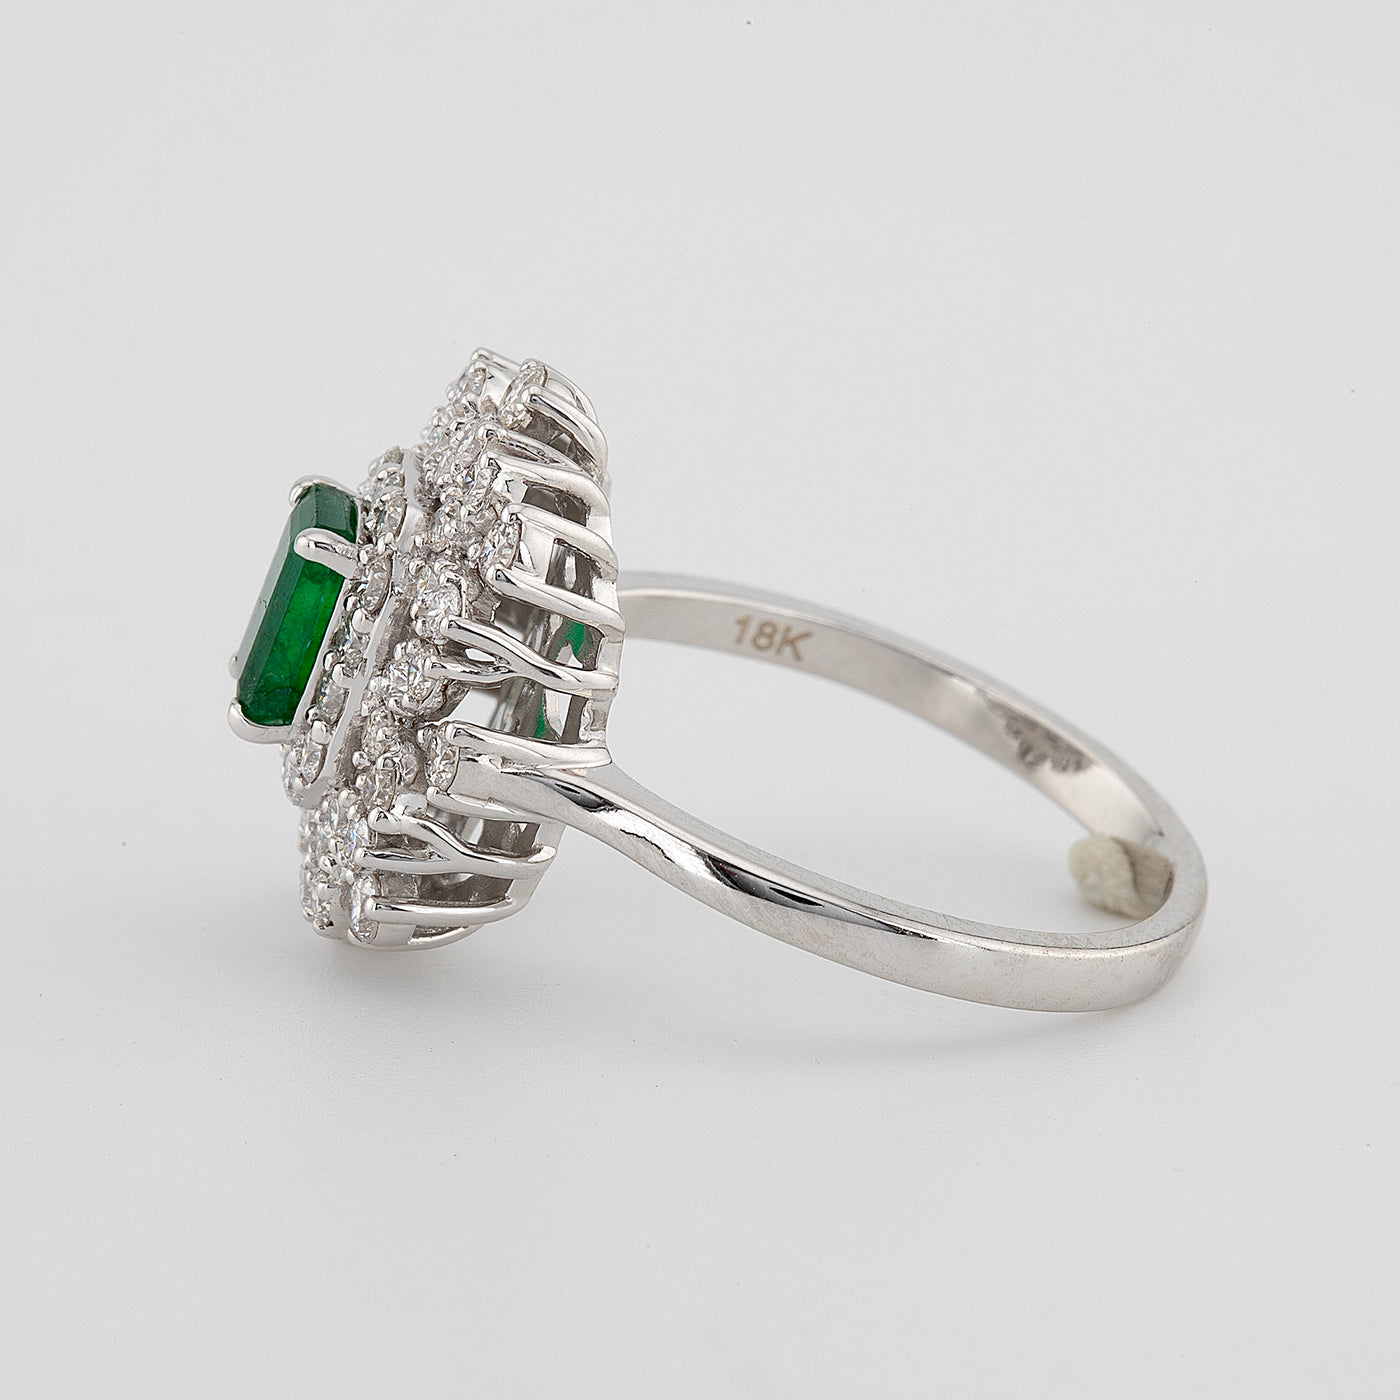 Zambian Emerald cut green emerald color with white round diamond halo setting engagement ring